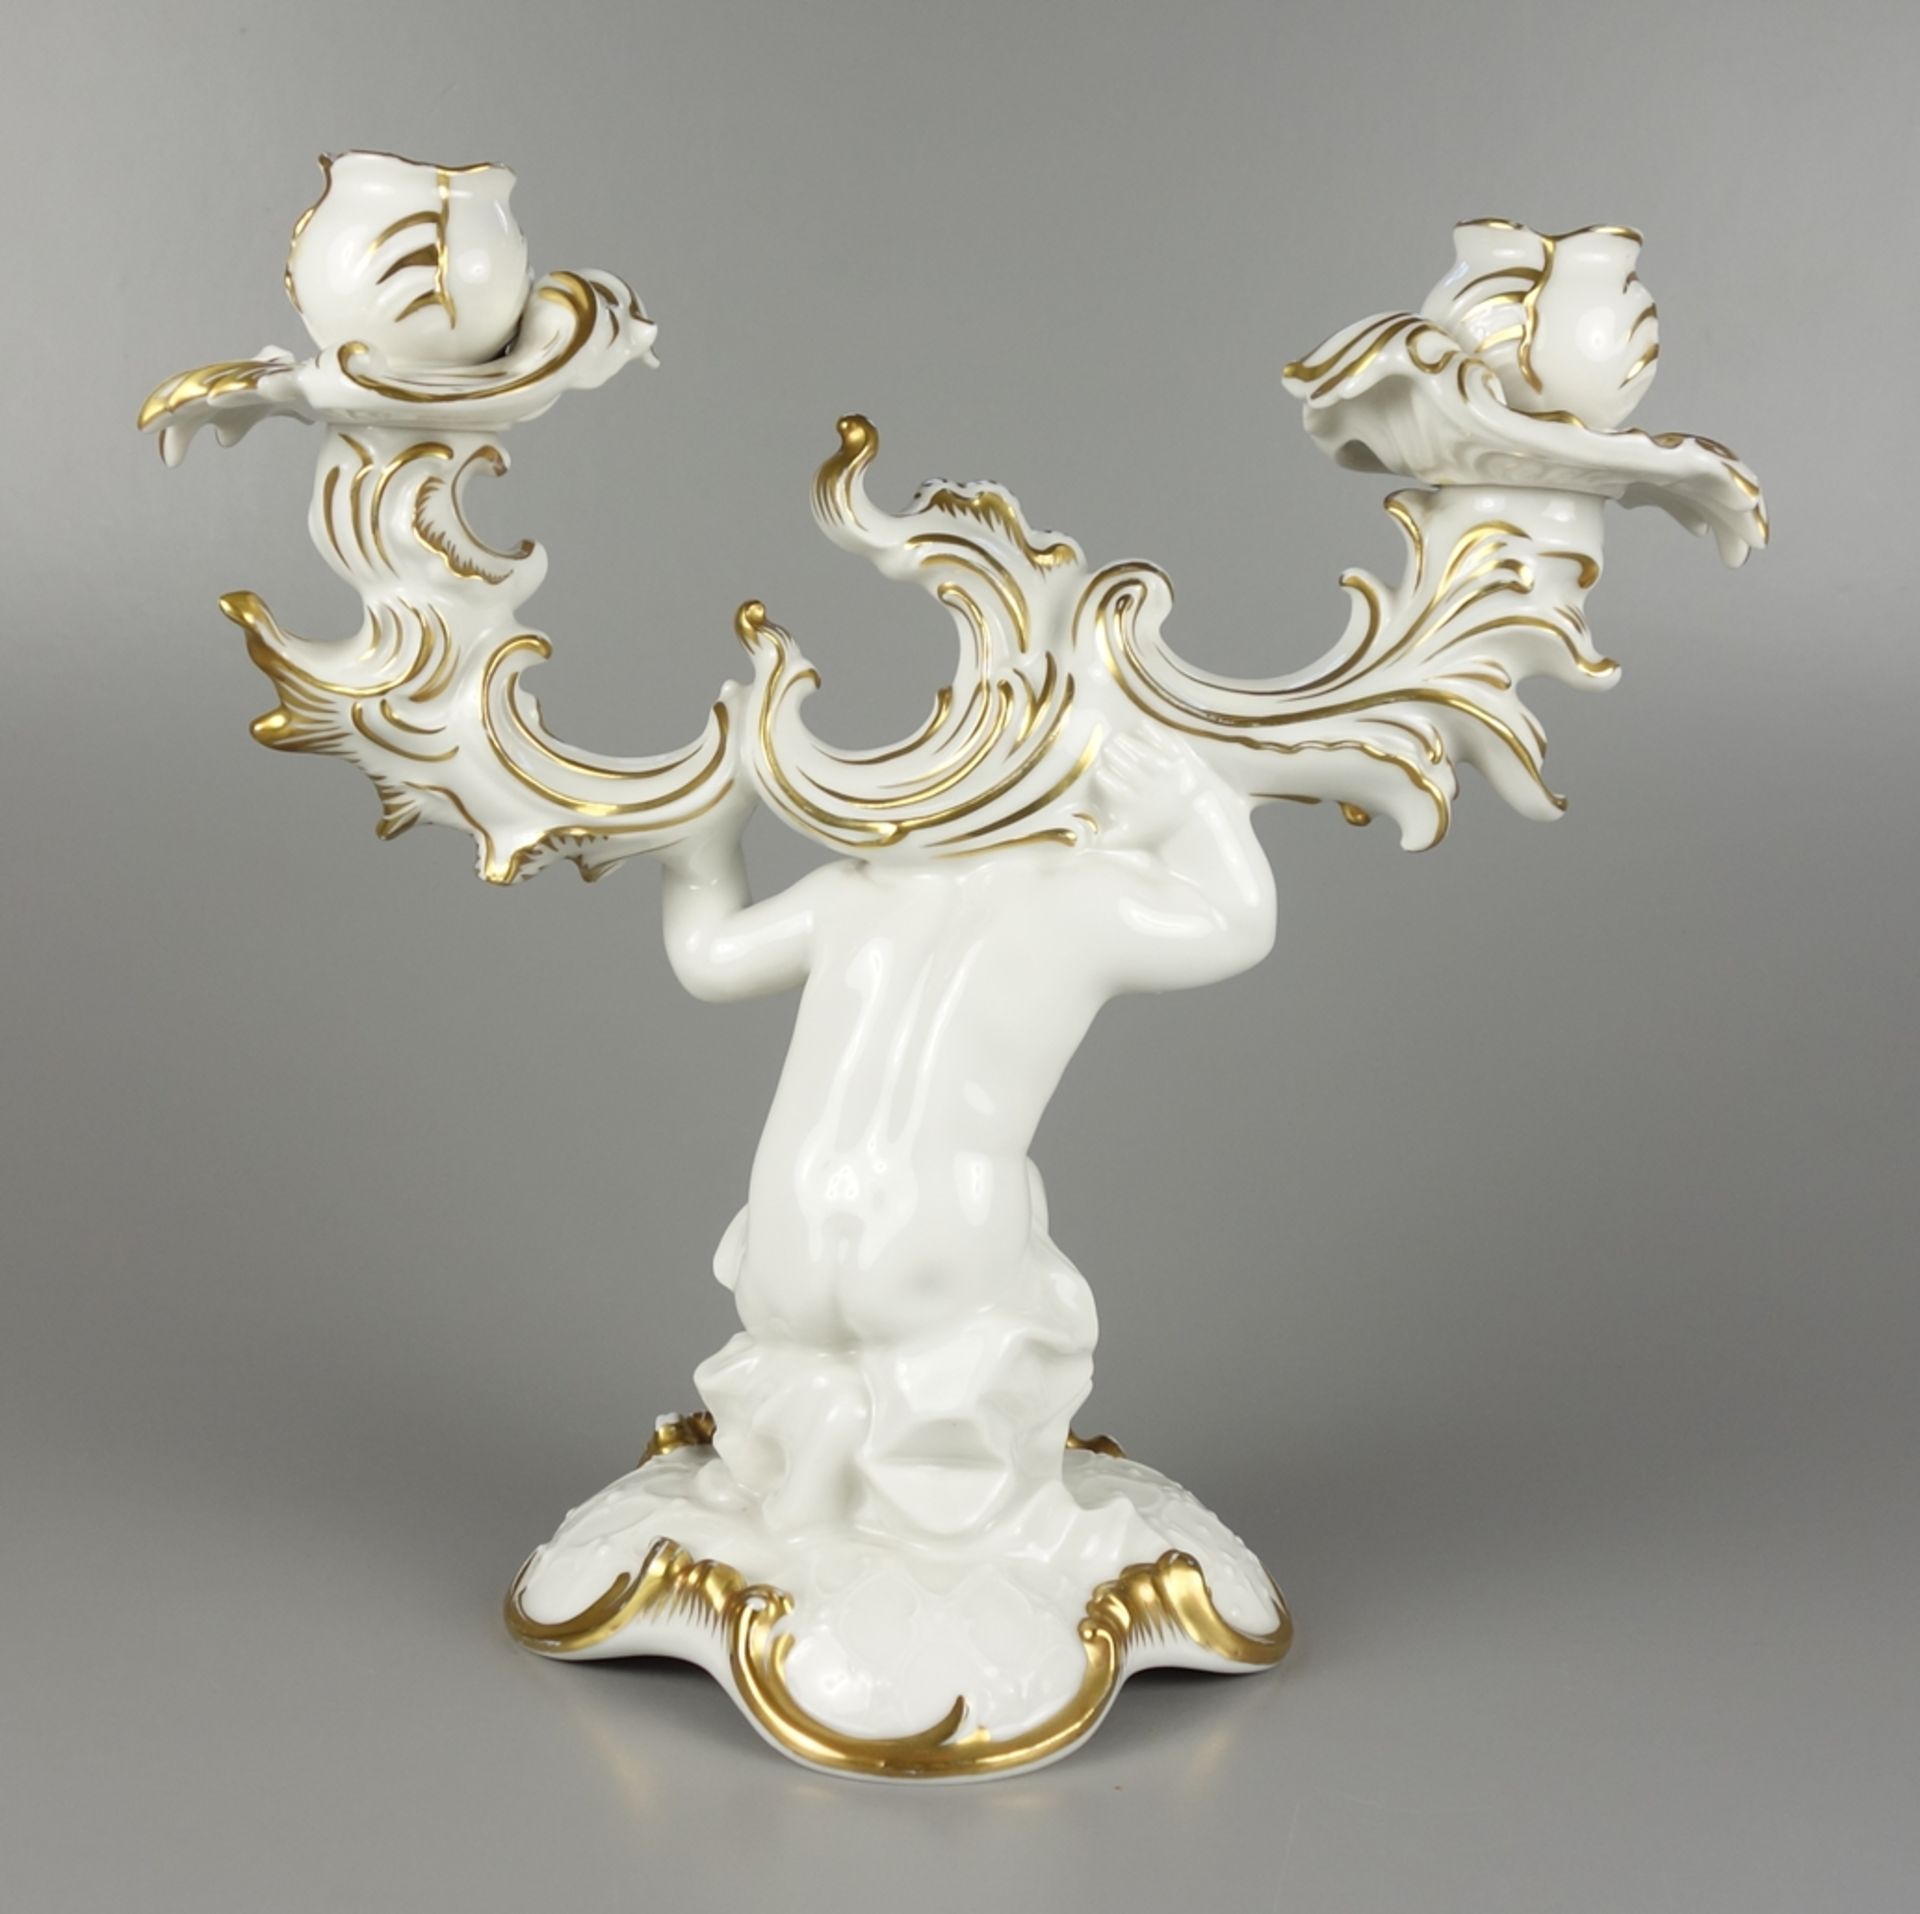 Pair of large figural candlesticks, Karl Tutter for Hutschenreuther, 1930s - Image 5 of 7